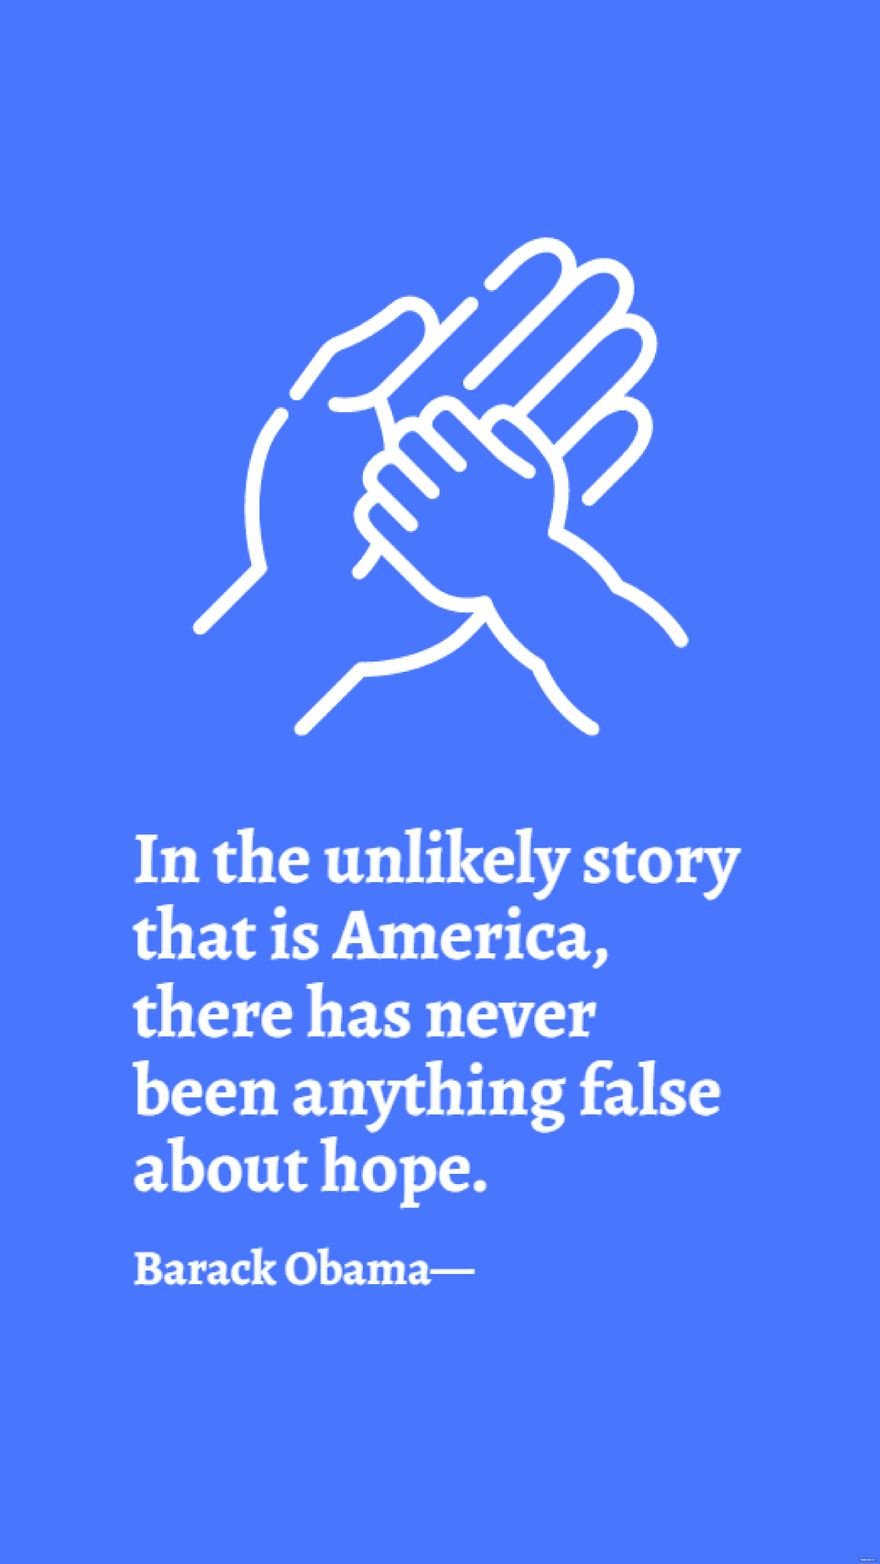 Barack Obama - In the unlikely story that is America, there has never been anything false about hope